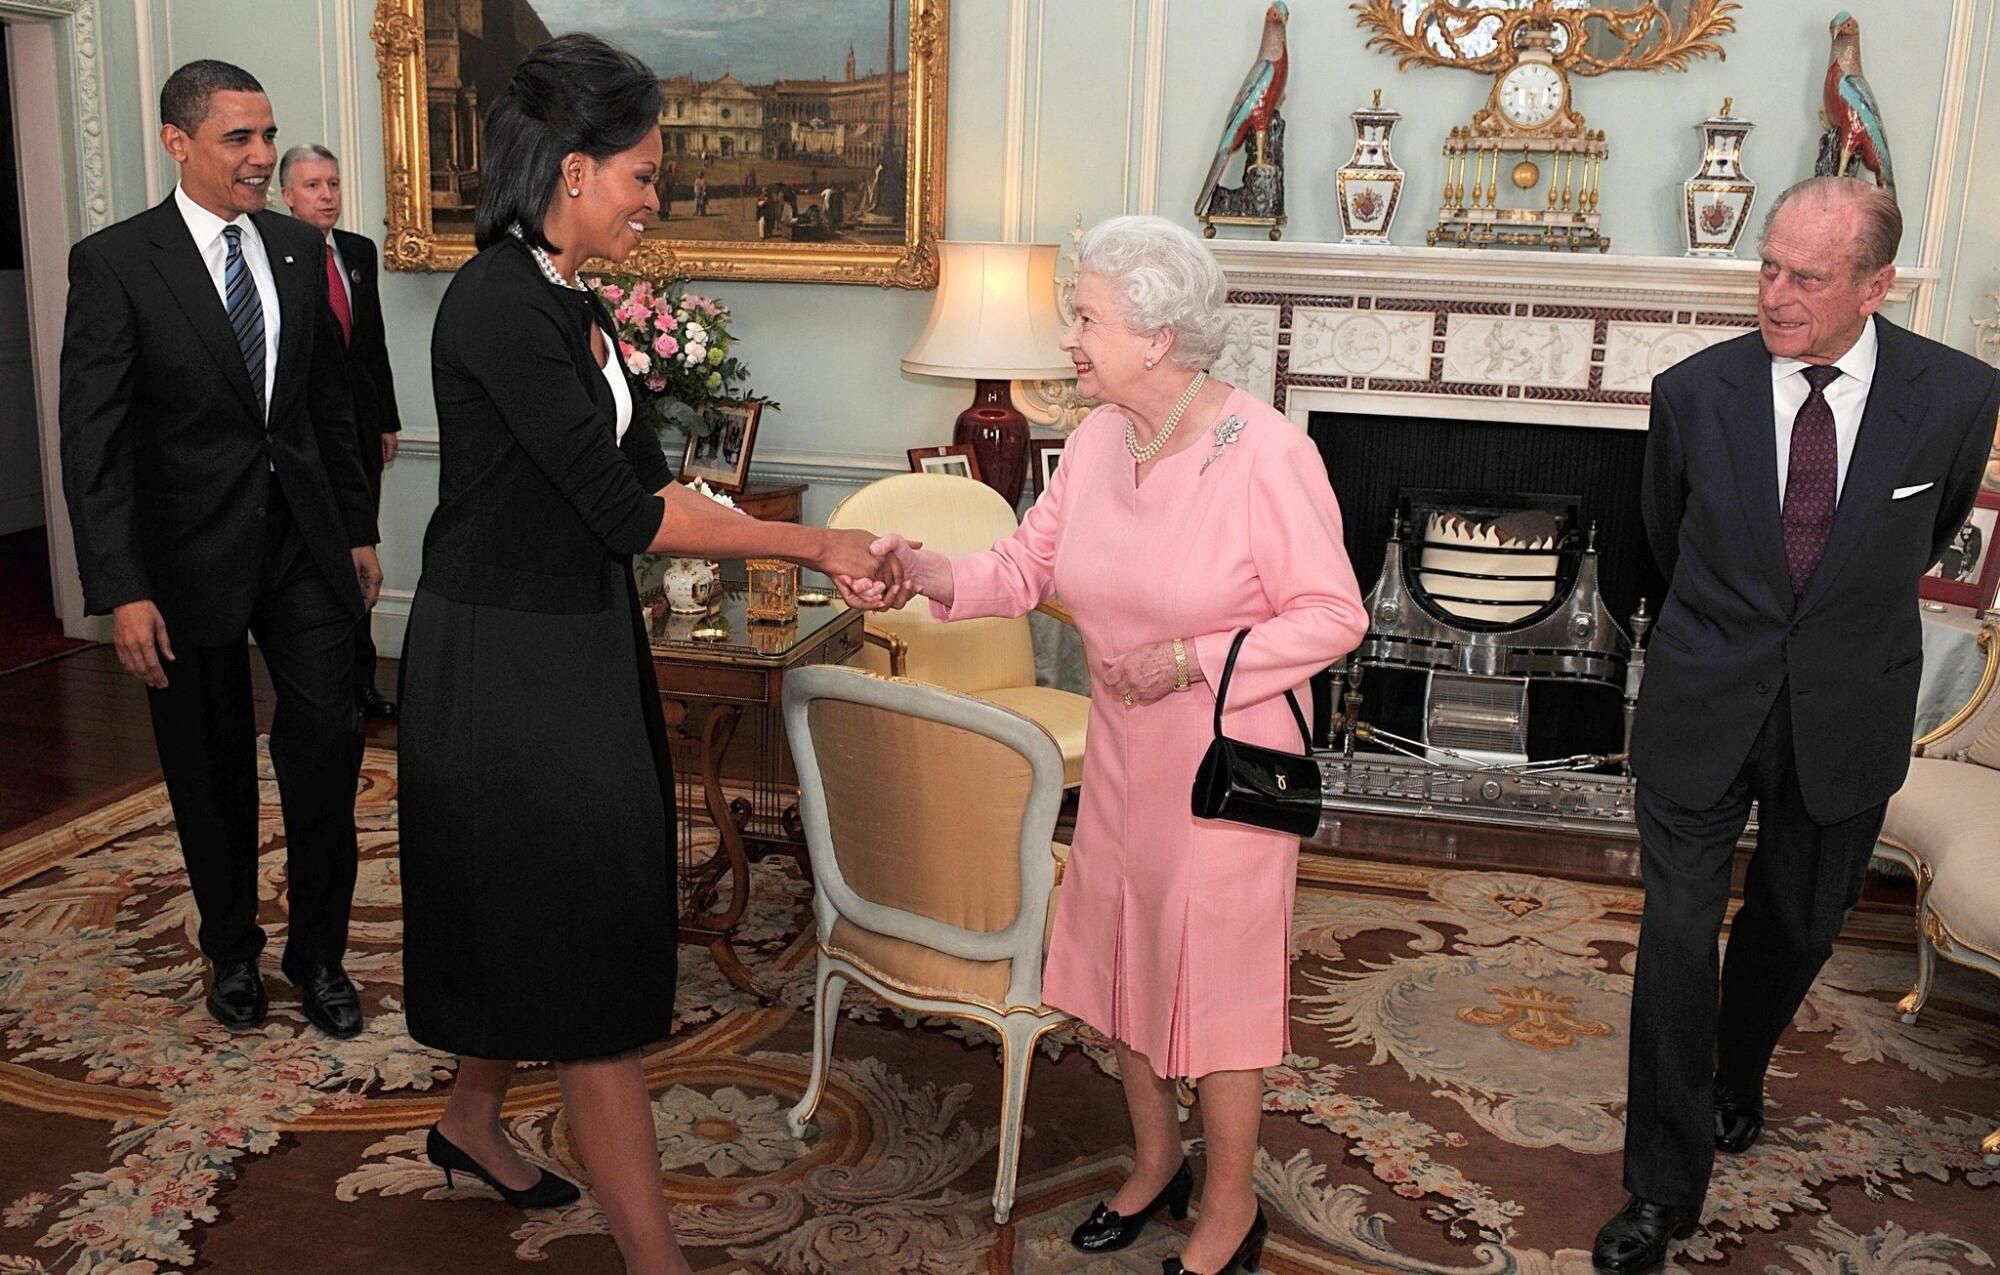 Queen Elizabeth II clasps hands with First Lady Michelle Obama, flanked by Prince Philip and President Obama